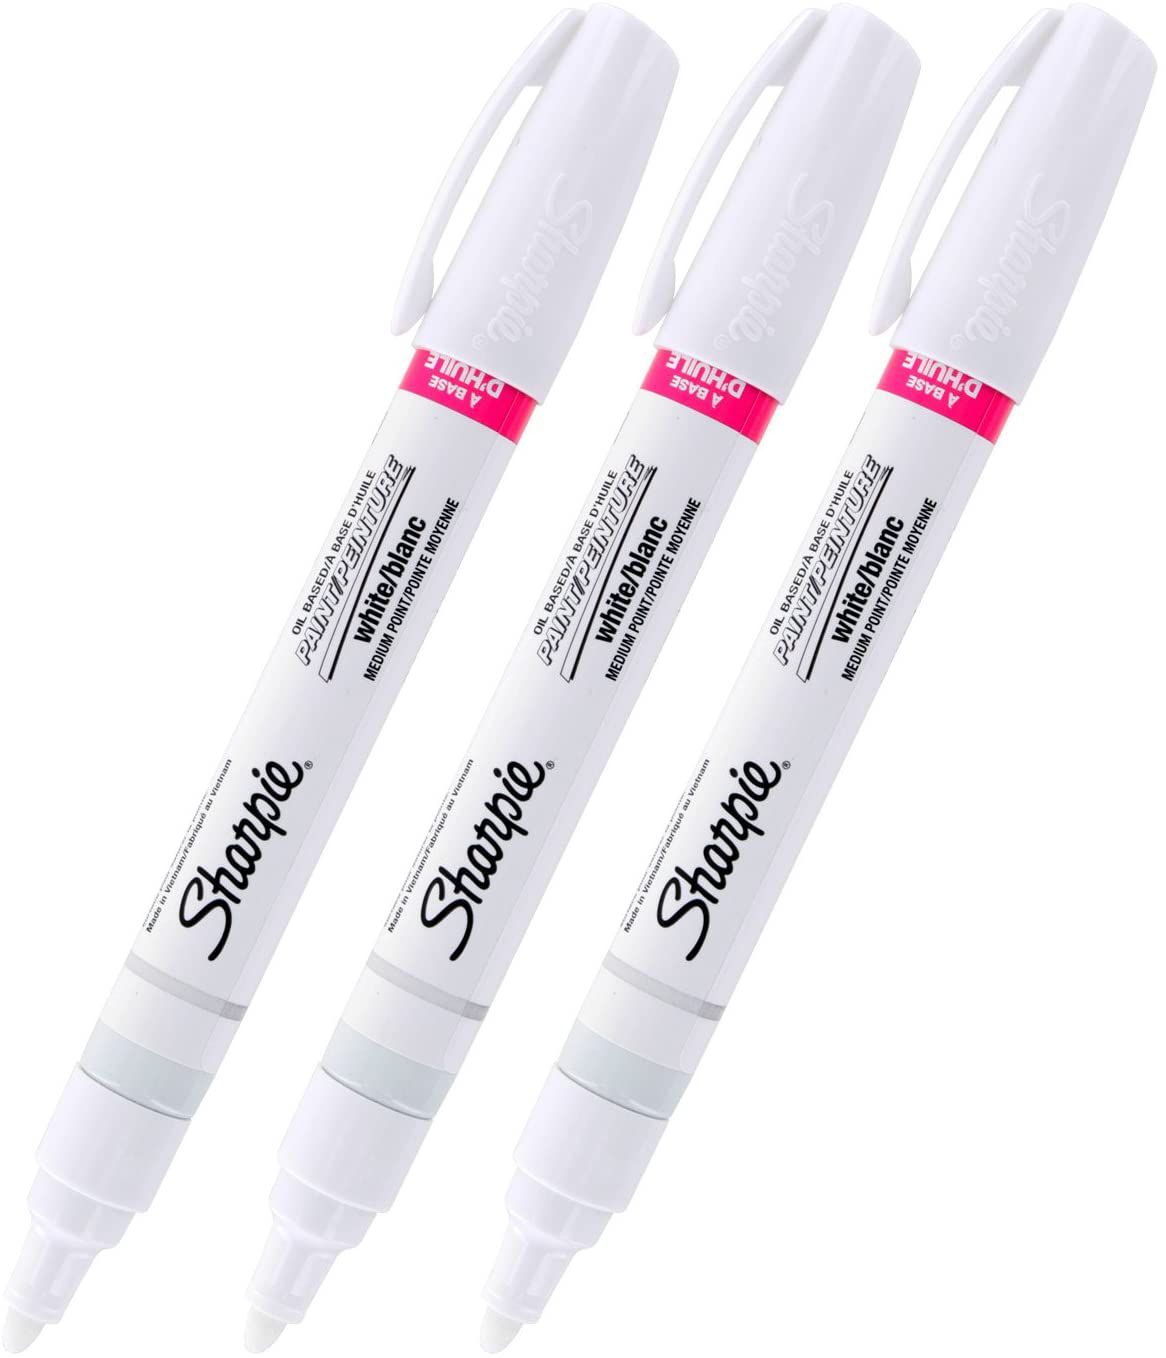 3-pack of white oil based sharpies